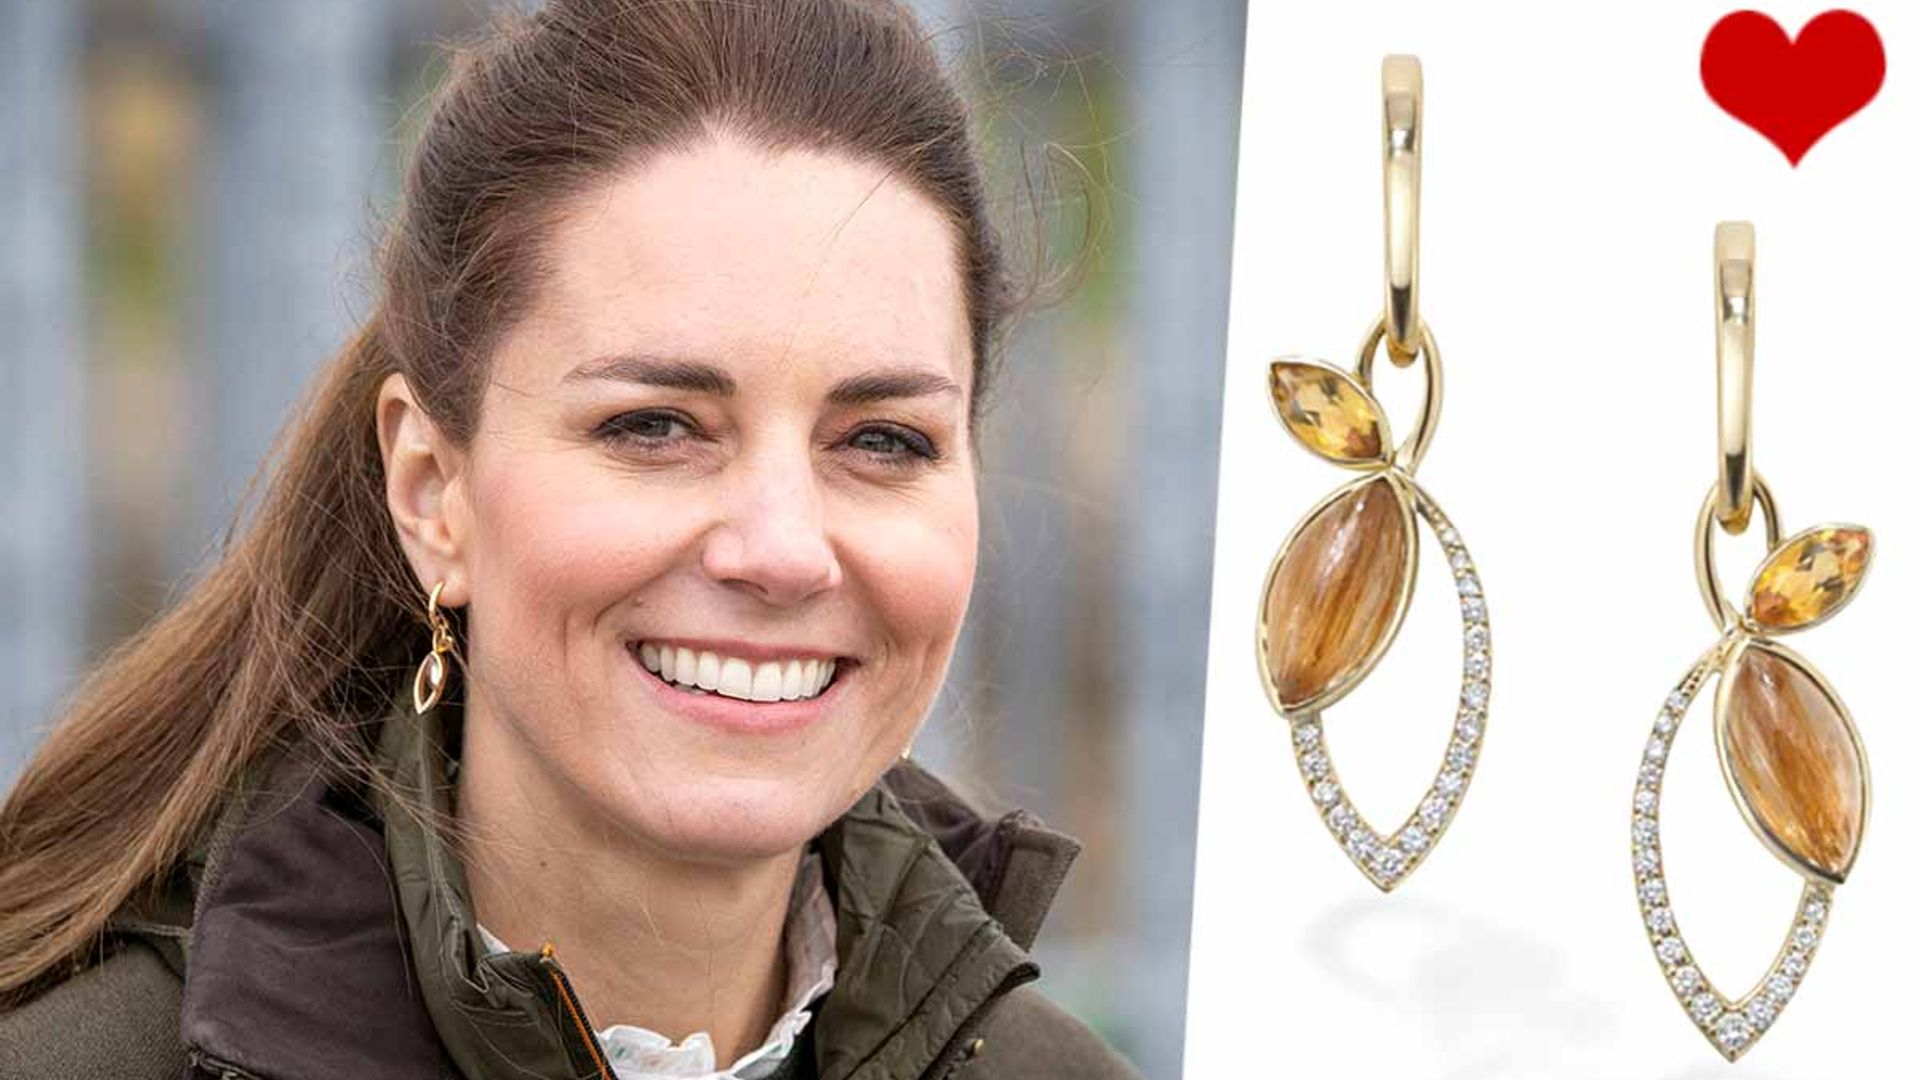 Kate Middleton Inspiration Animal Rescue Wedding Jewelry Adorable Pearl Earrings Stylish Jewelry Bridal Earrings Silver Leverback